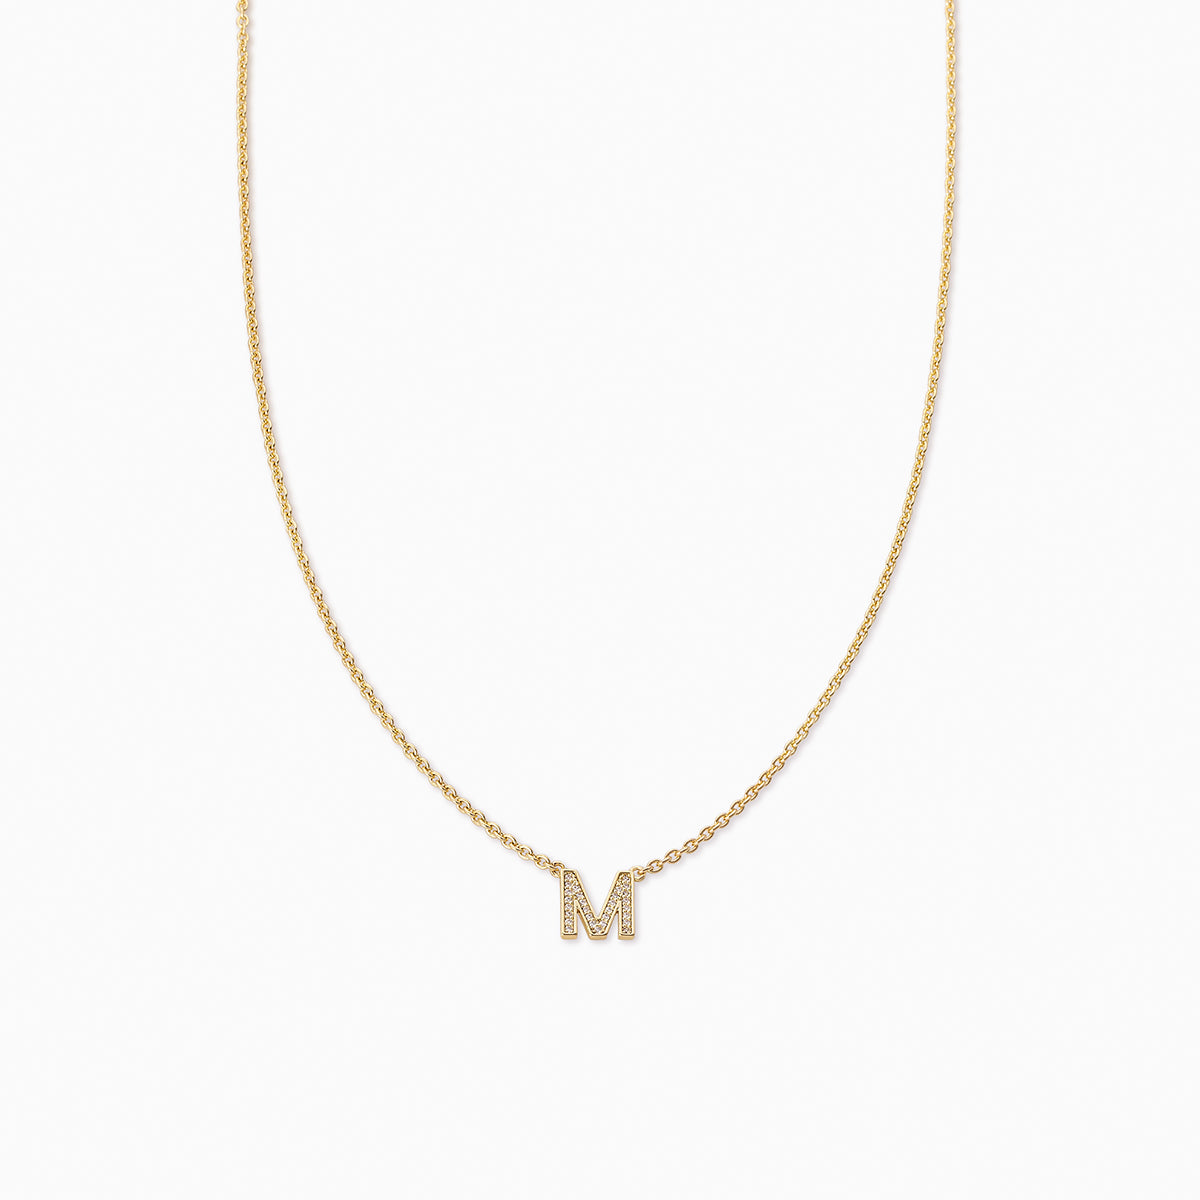 Initial Here Necklace | Gold M | Product Image | Uncommon James